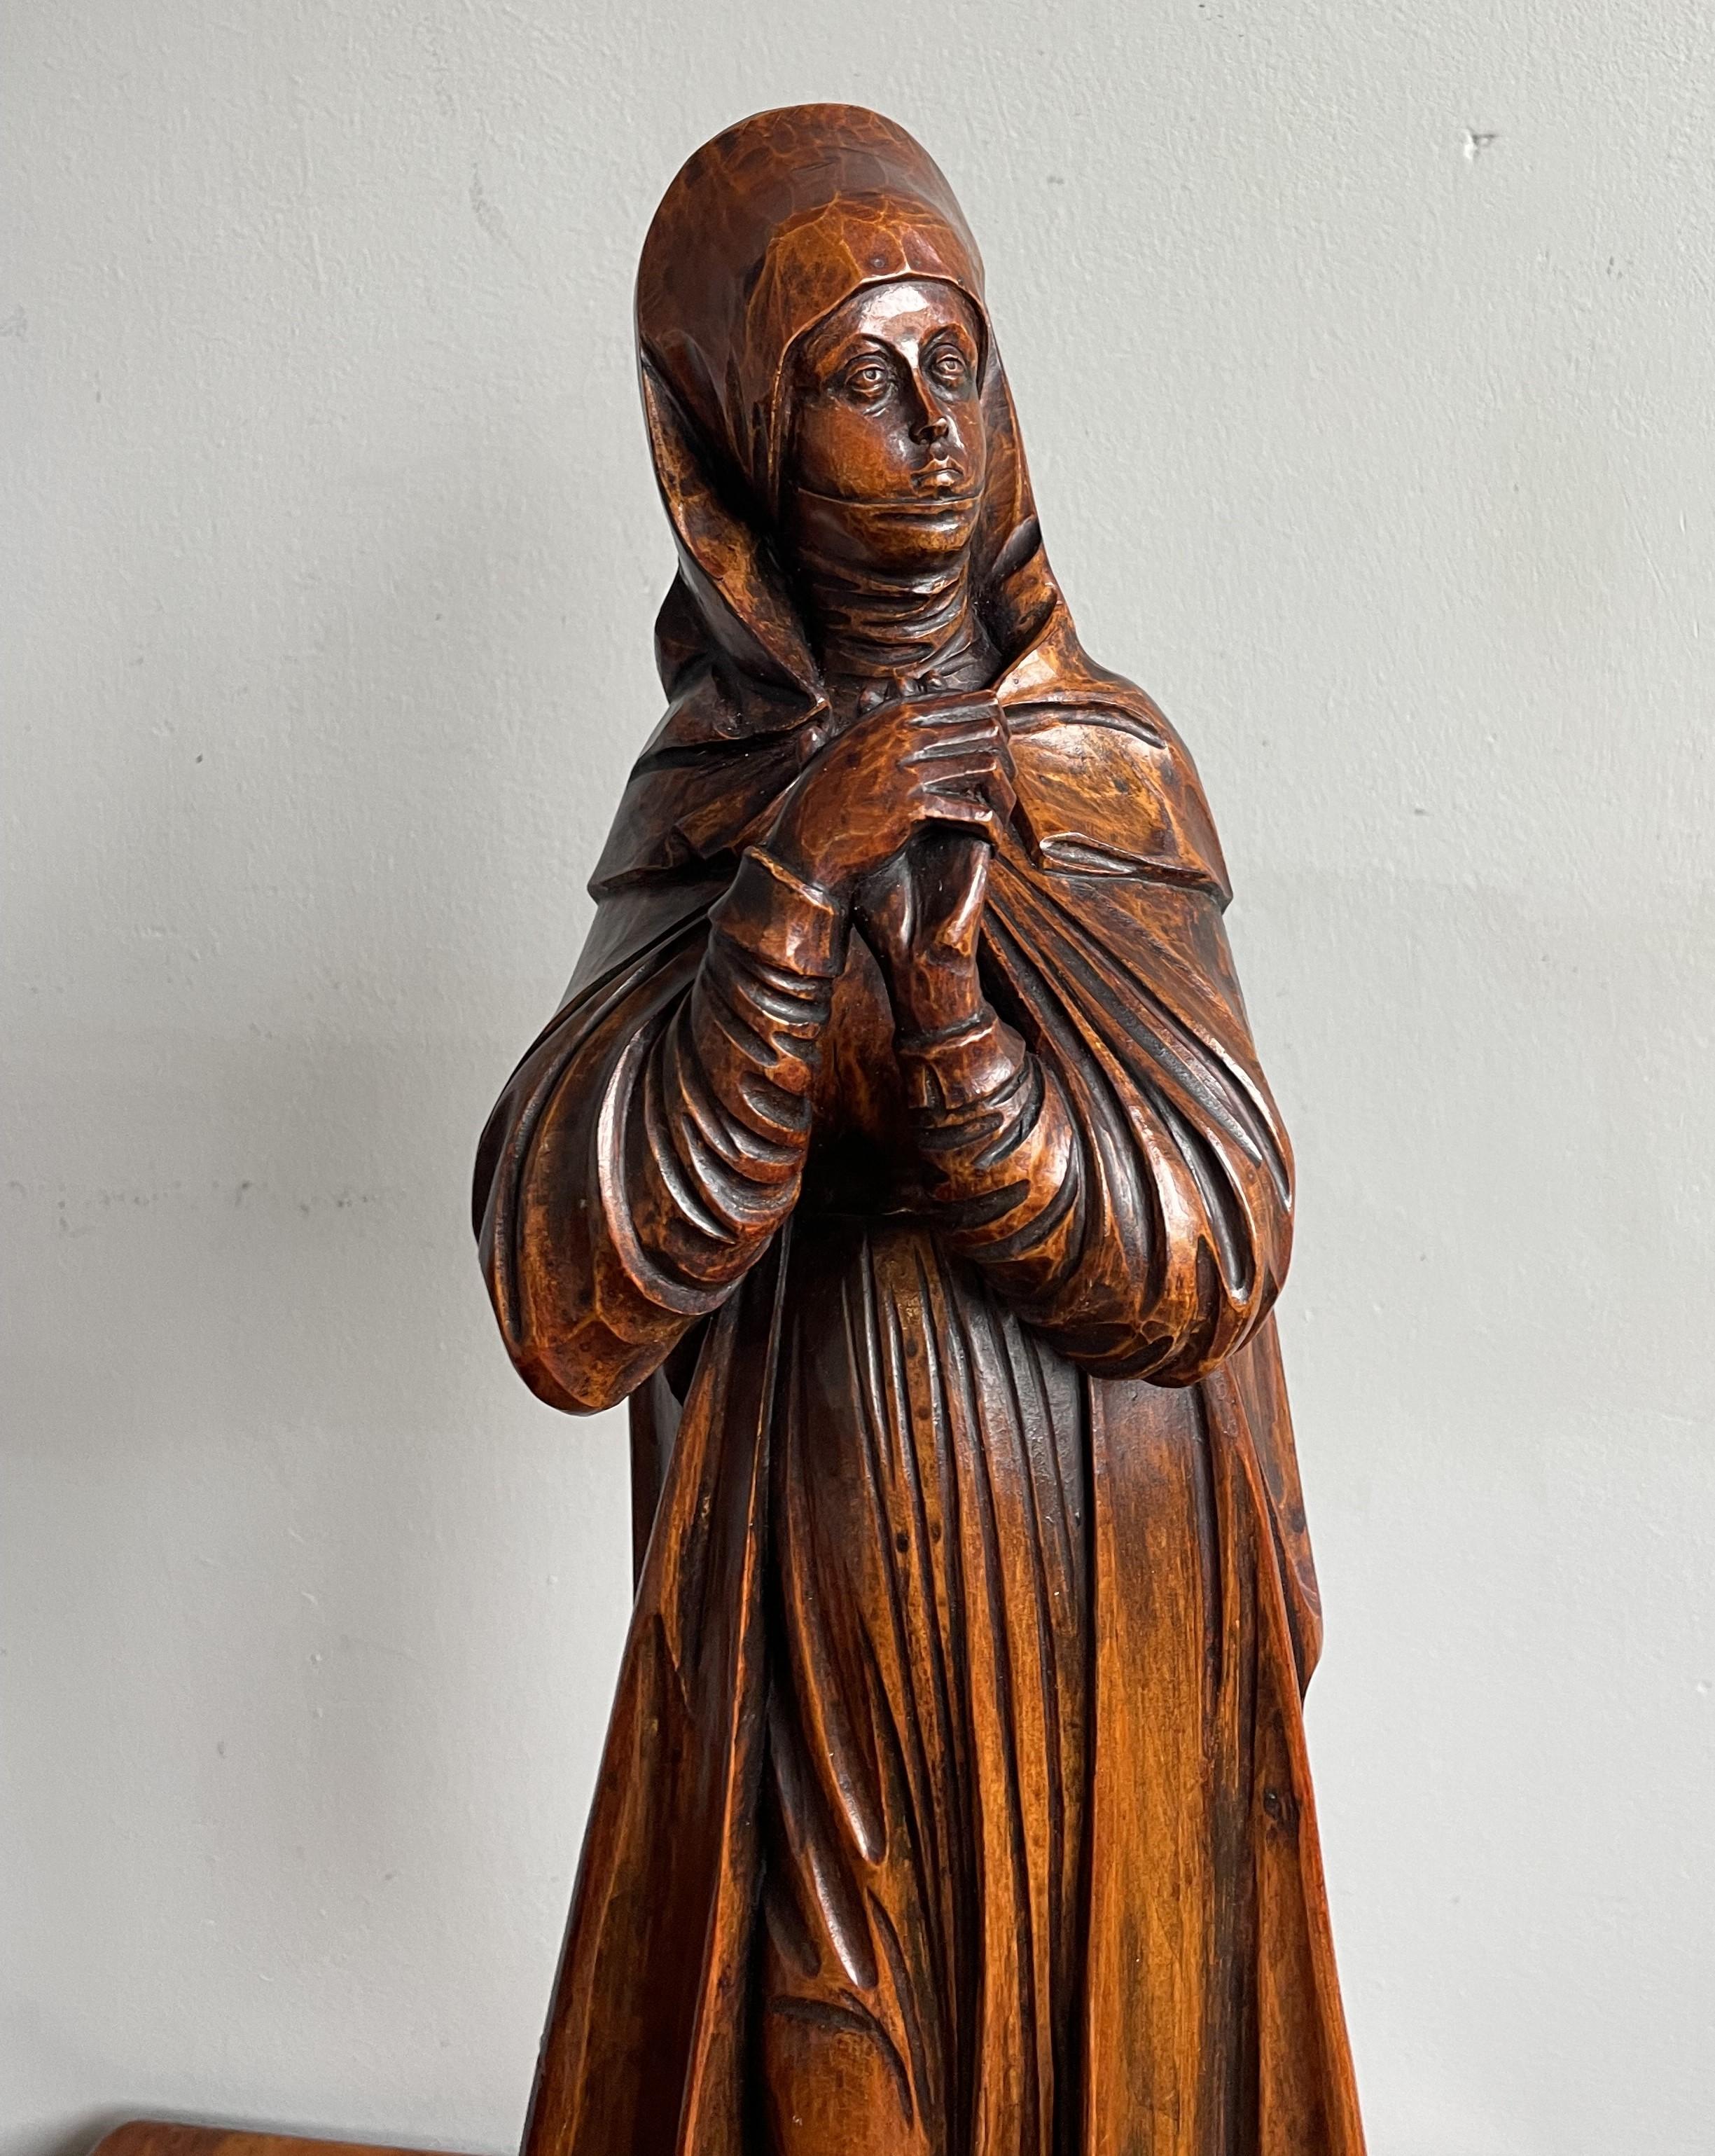 Hand-Crafted 2 Hand Carved Antique Statuette & Sculpture of Saint Teresa of Avila / of Jesus For Sale